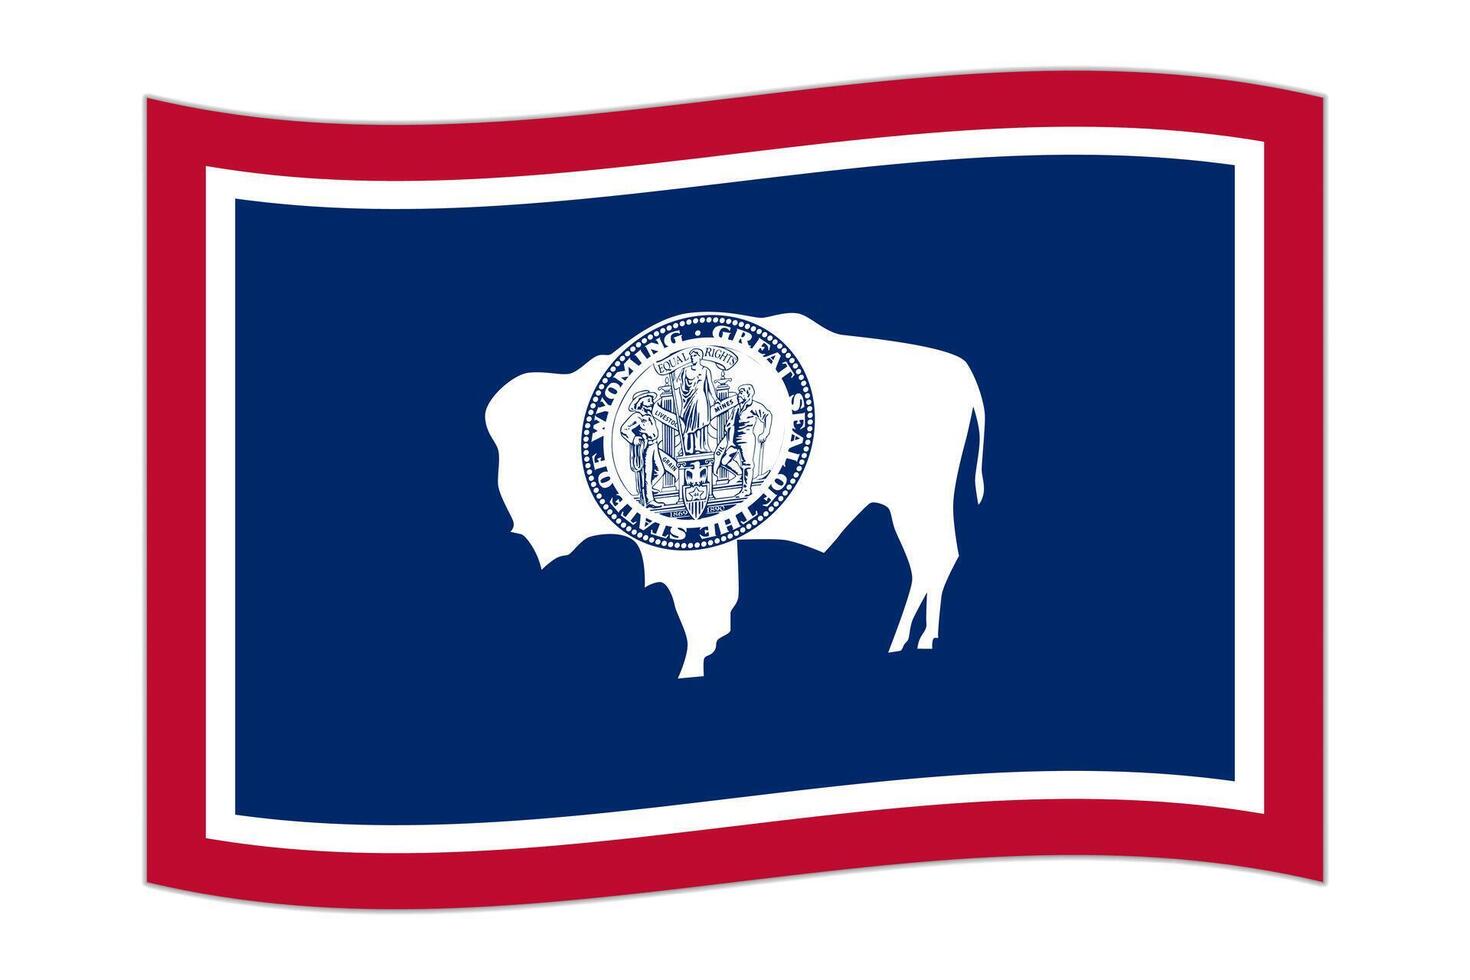 Waving flag of the Wyoming state. Vector illustration.